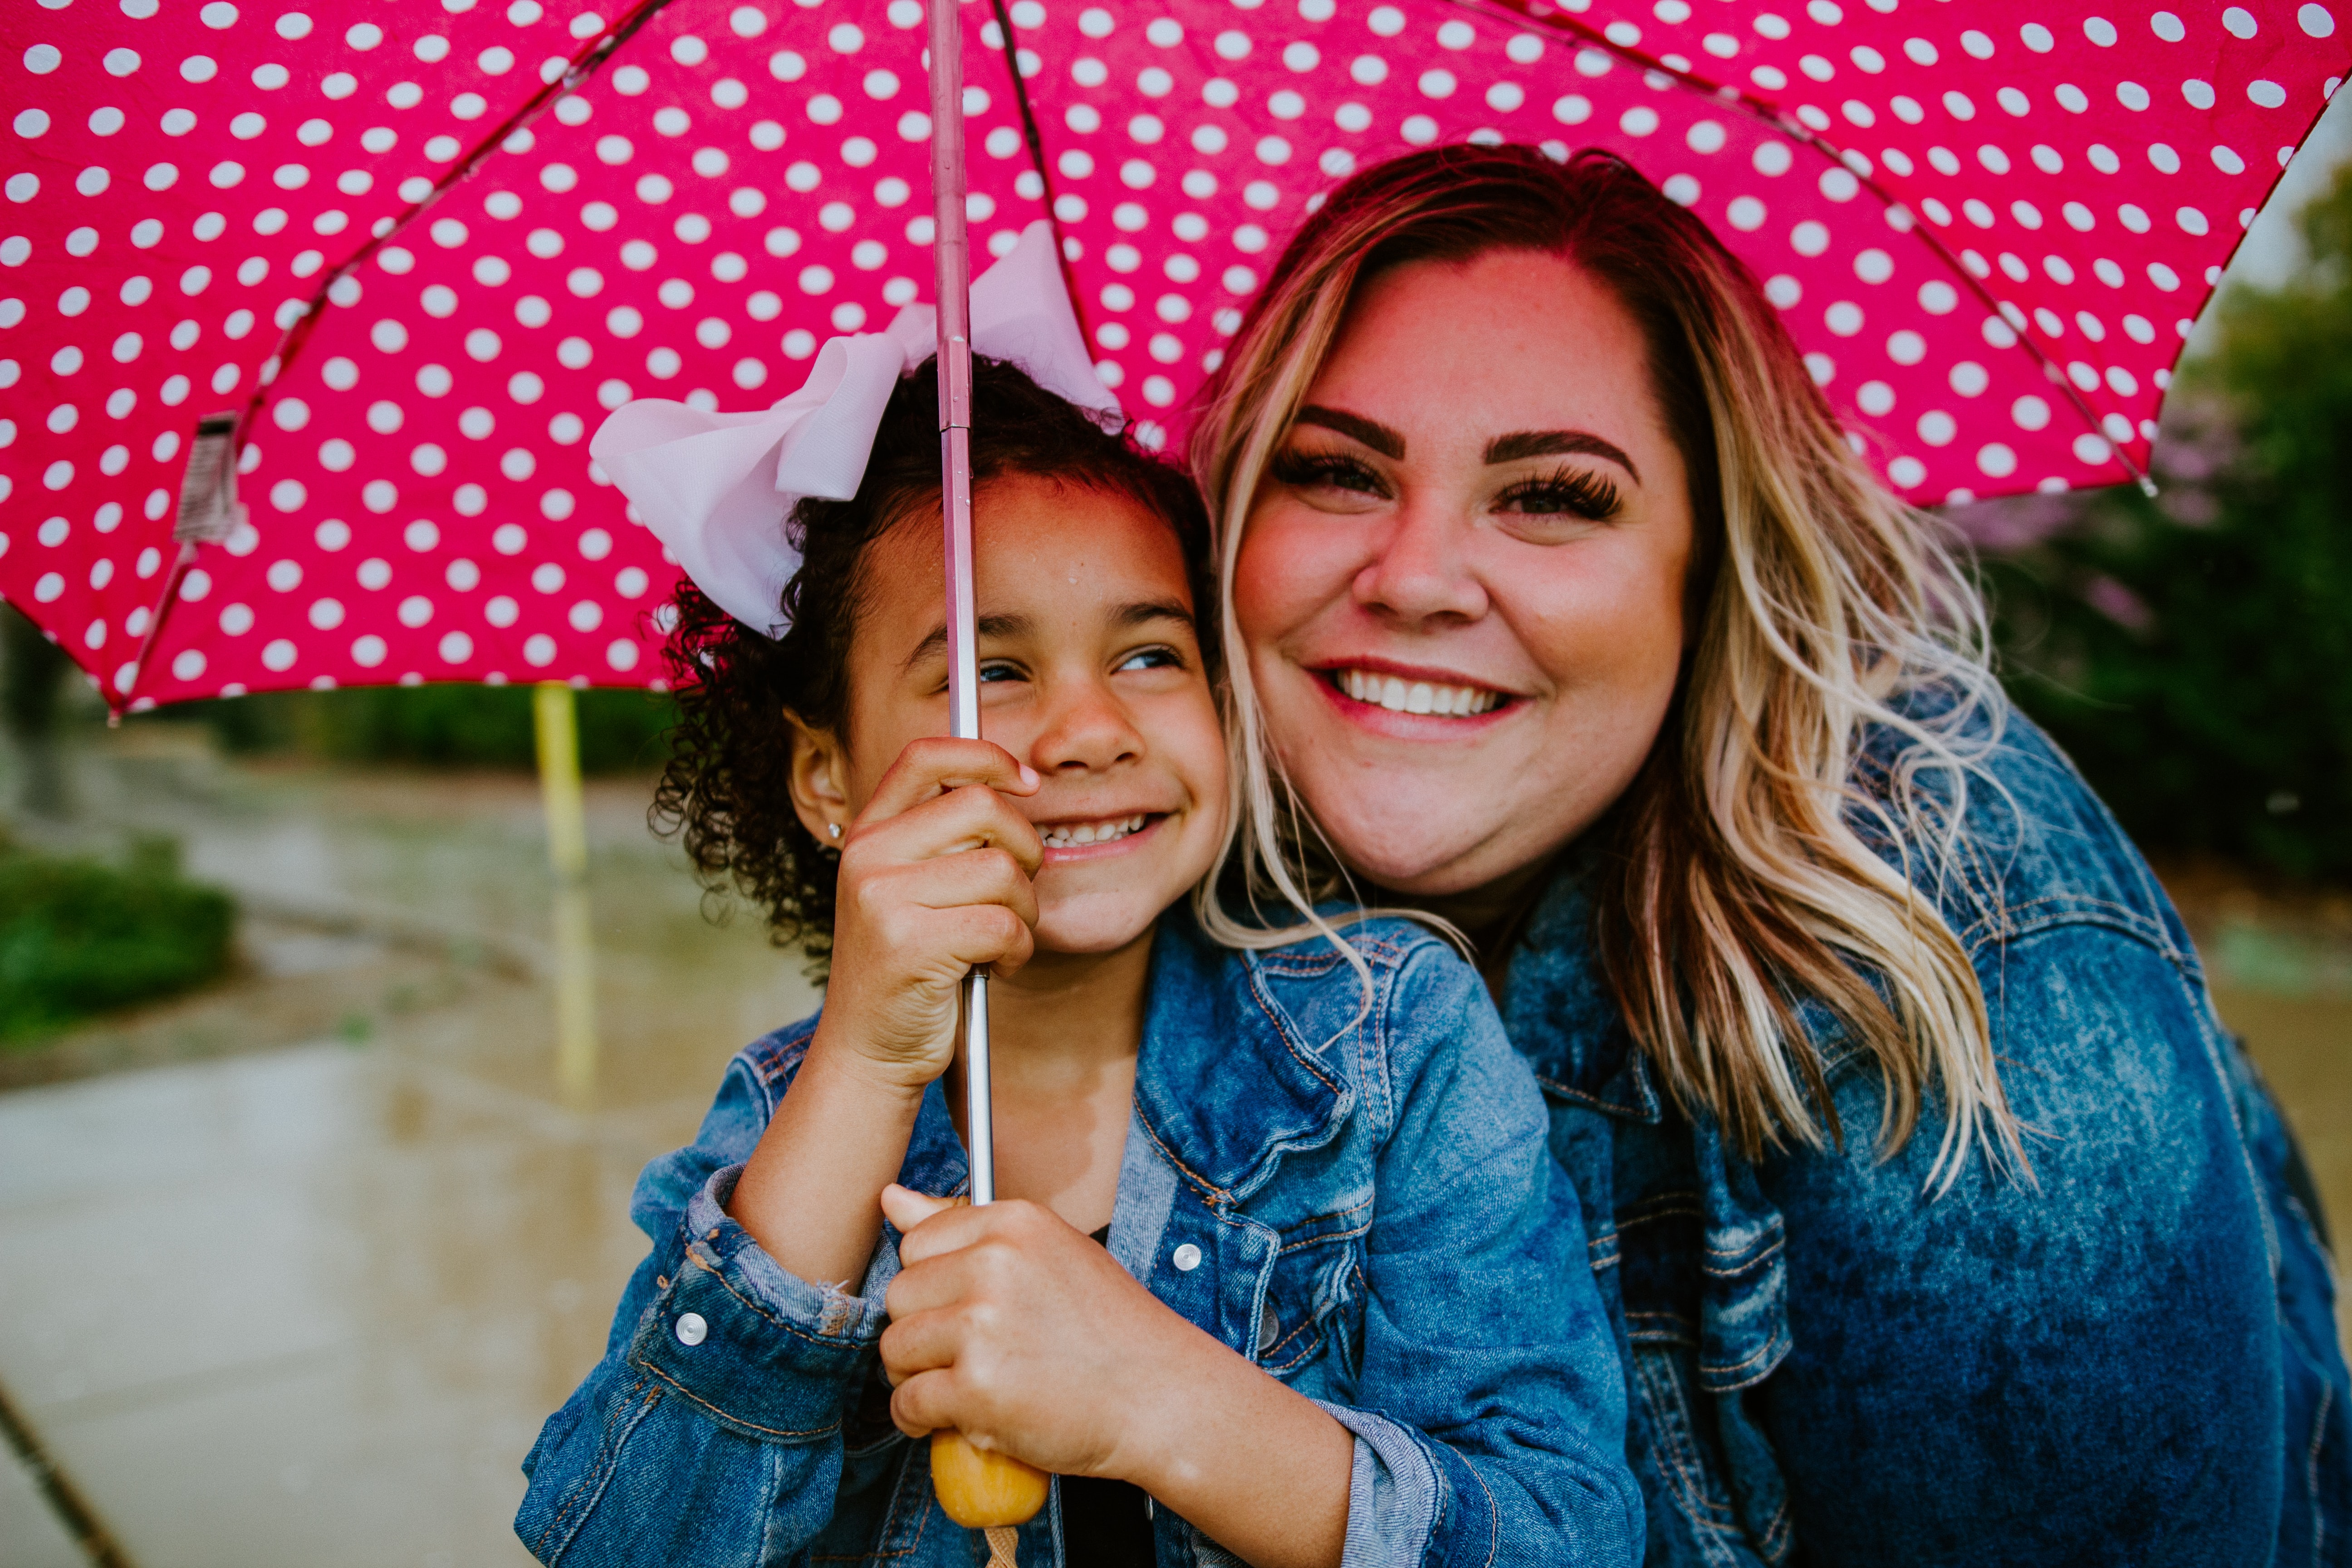 Woman and child smiling under a pink spotty umbrella